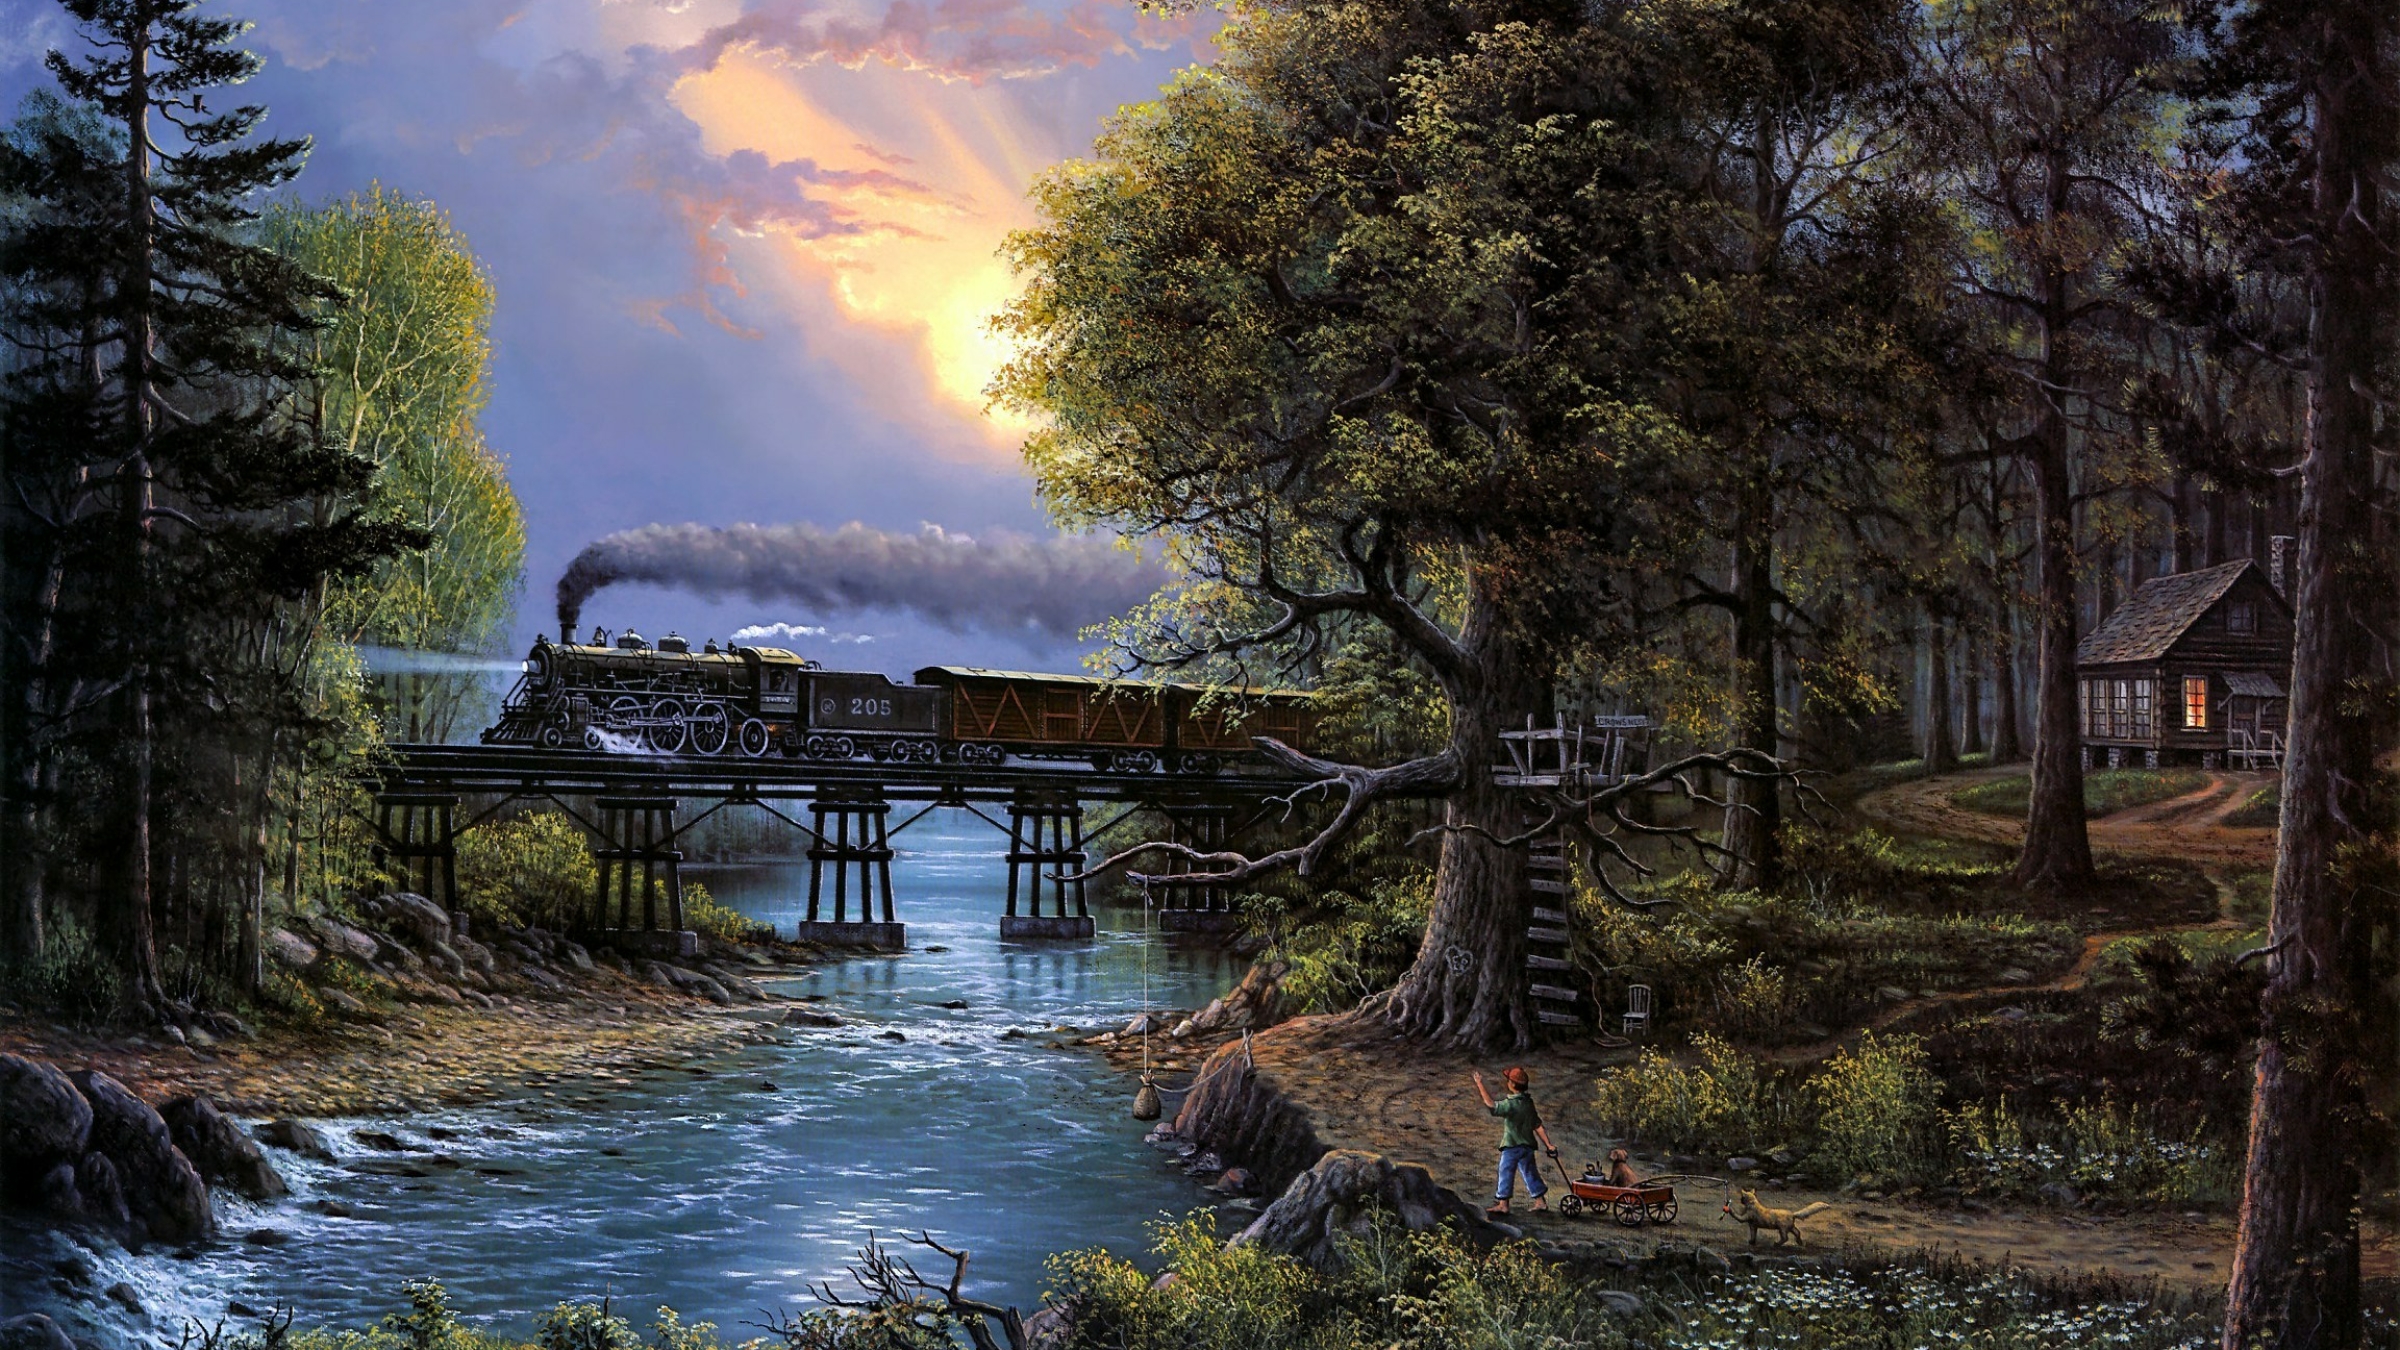 General 2400x1350 train painting steam locomotive water forest trees cabin sunset glow digital art